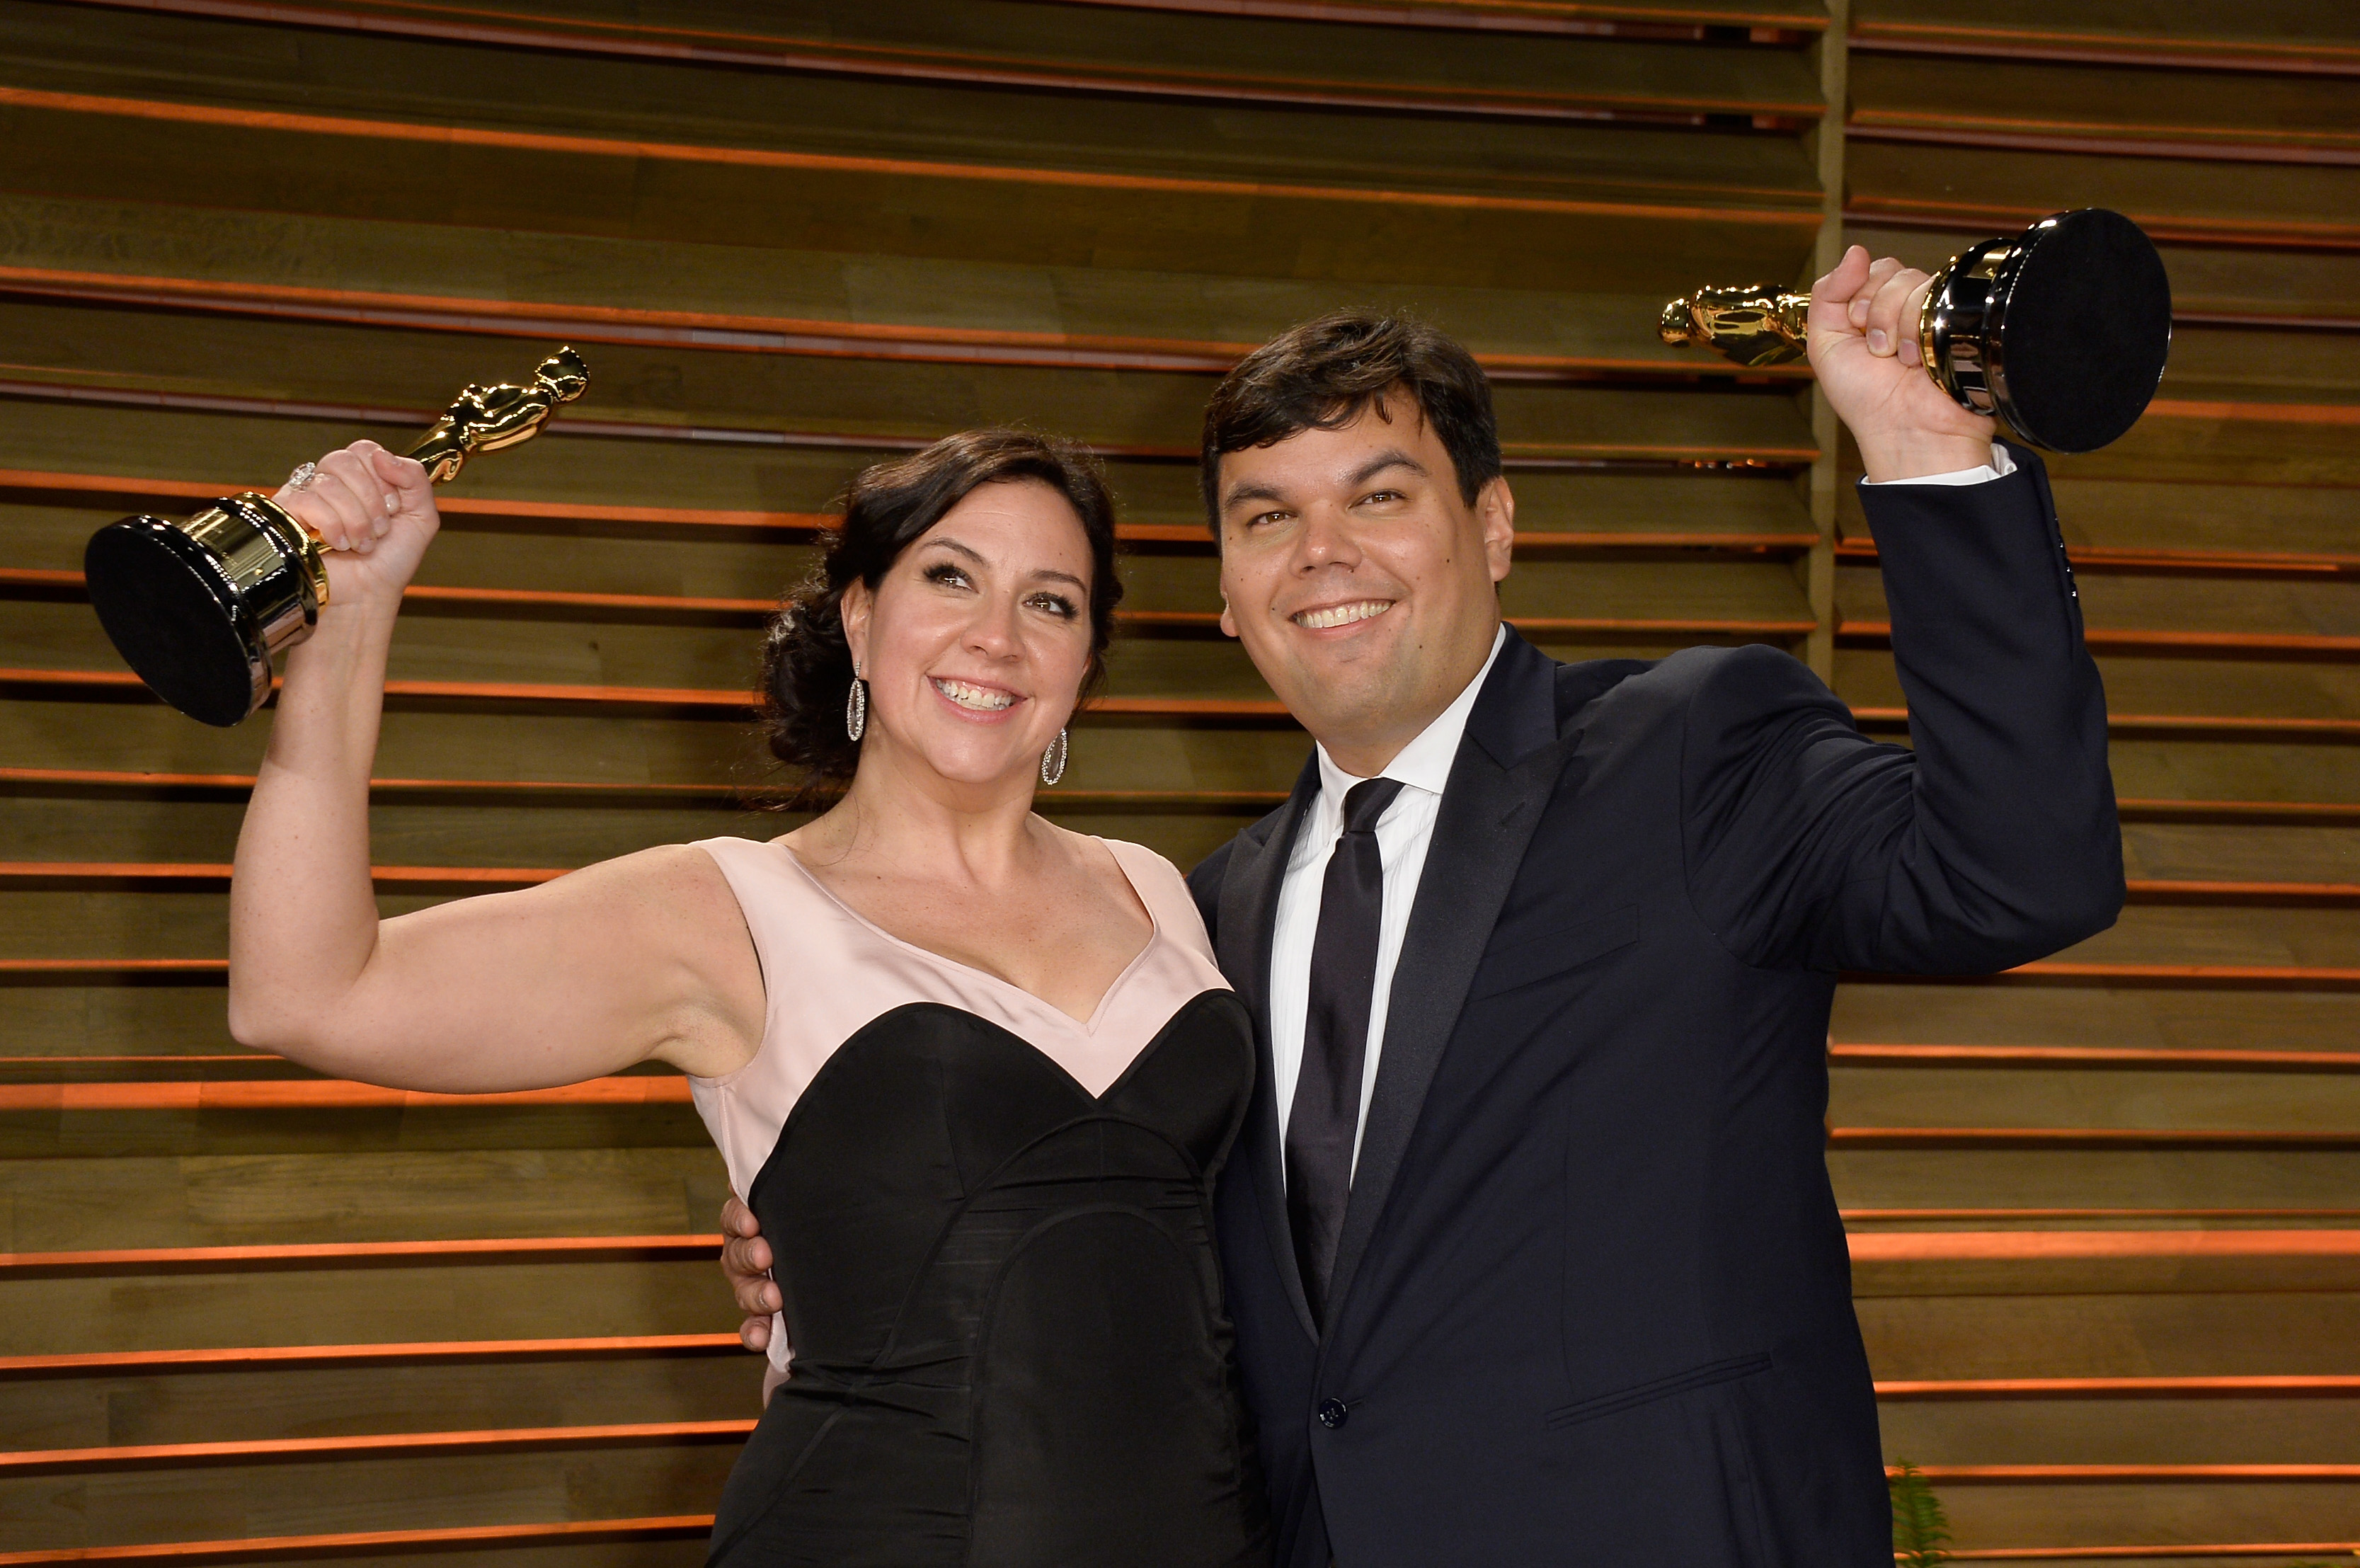 Songwriters Kristen Anderson-Lopez (L) and Robert Lopez at the 2014 Vanity Fair Oscar Party in West Hollywood, Calif. on March 2, 2014. (Pascal Le Segretain—Getty Images)